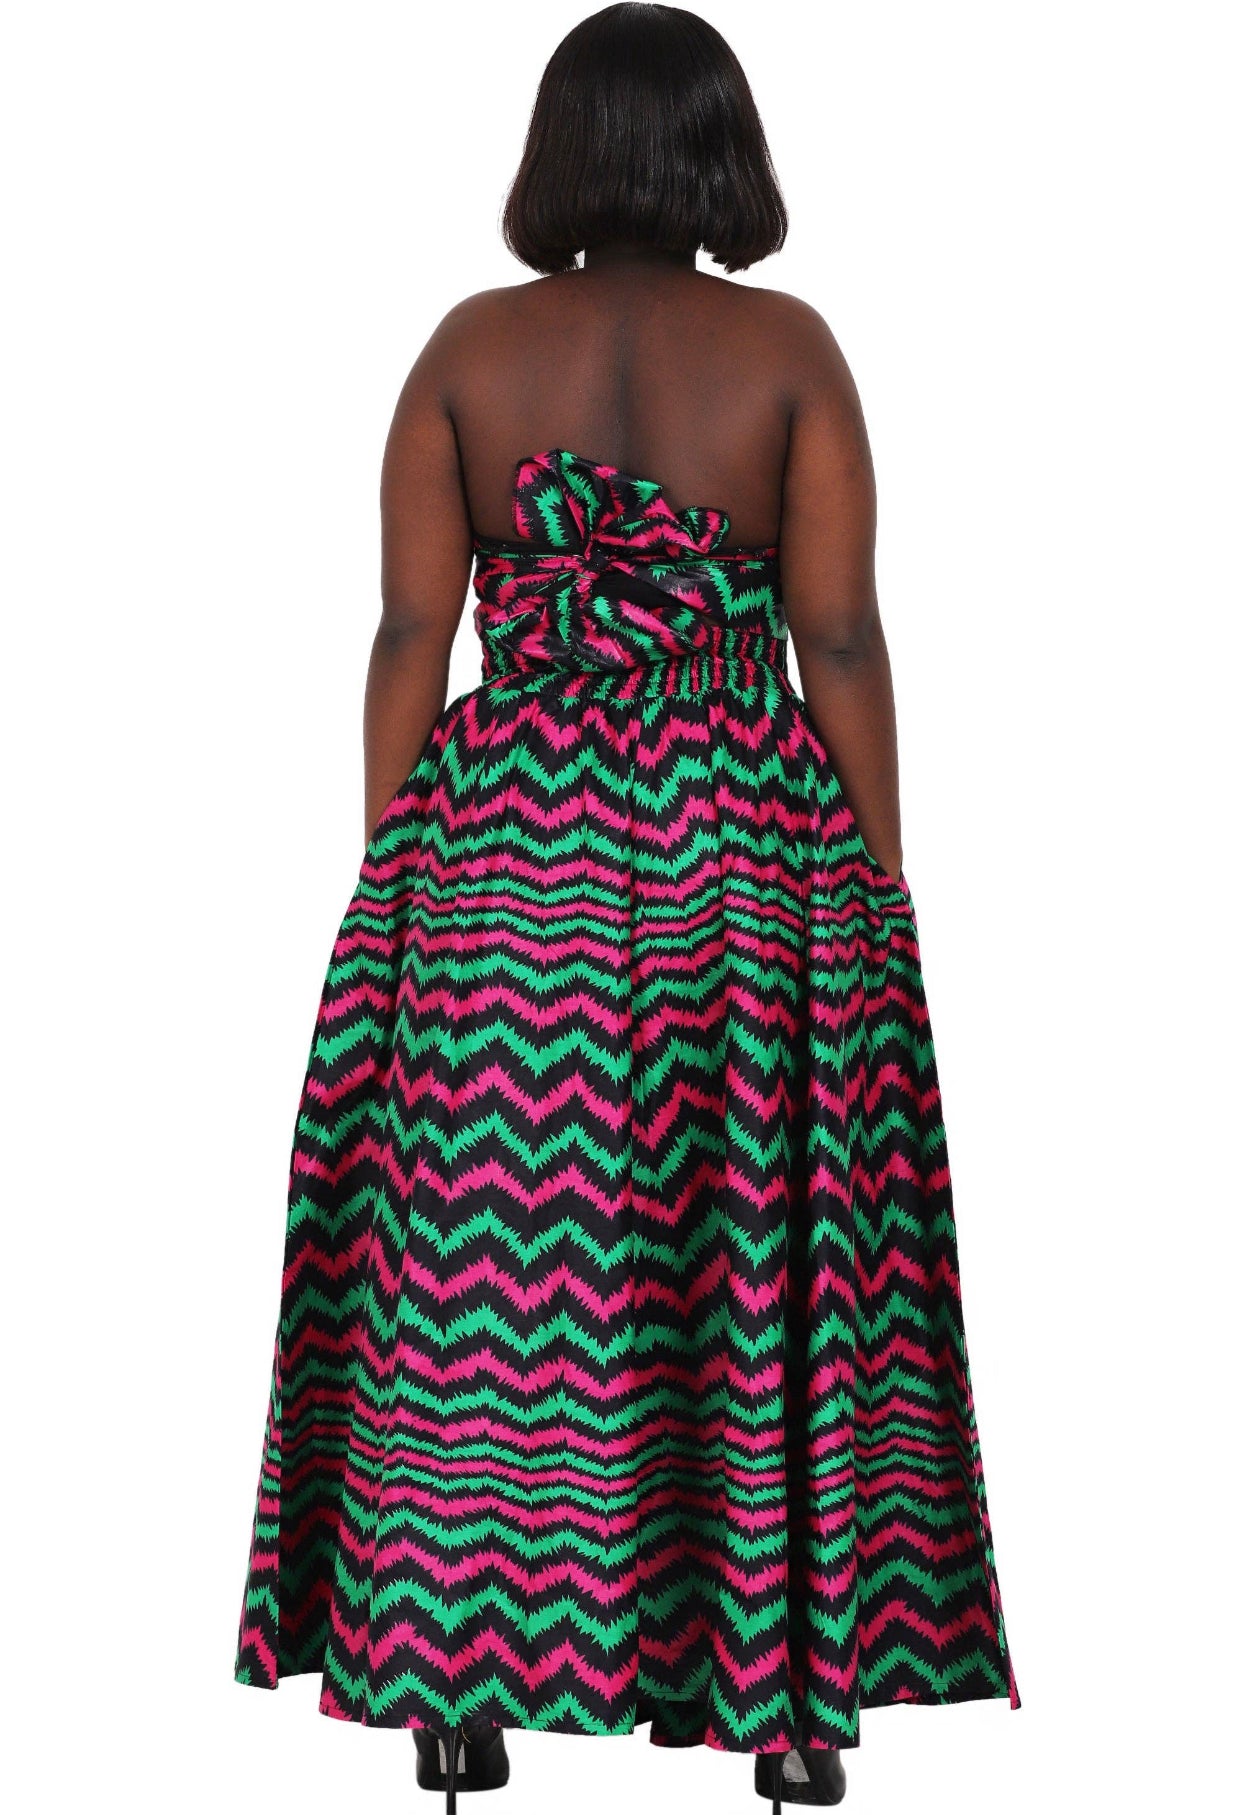 Hand Made African Print Full Skirt with Coordinating Head Wrap and FaceMask  (Magenta, Green, Black)